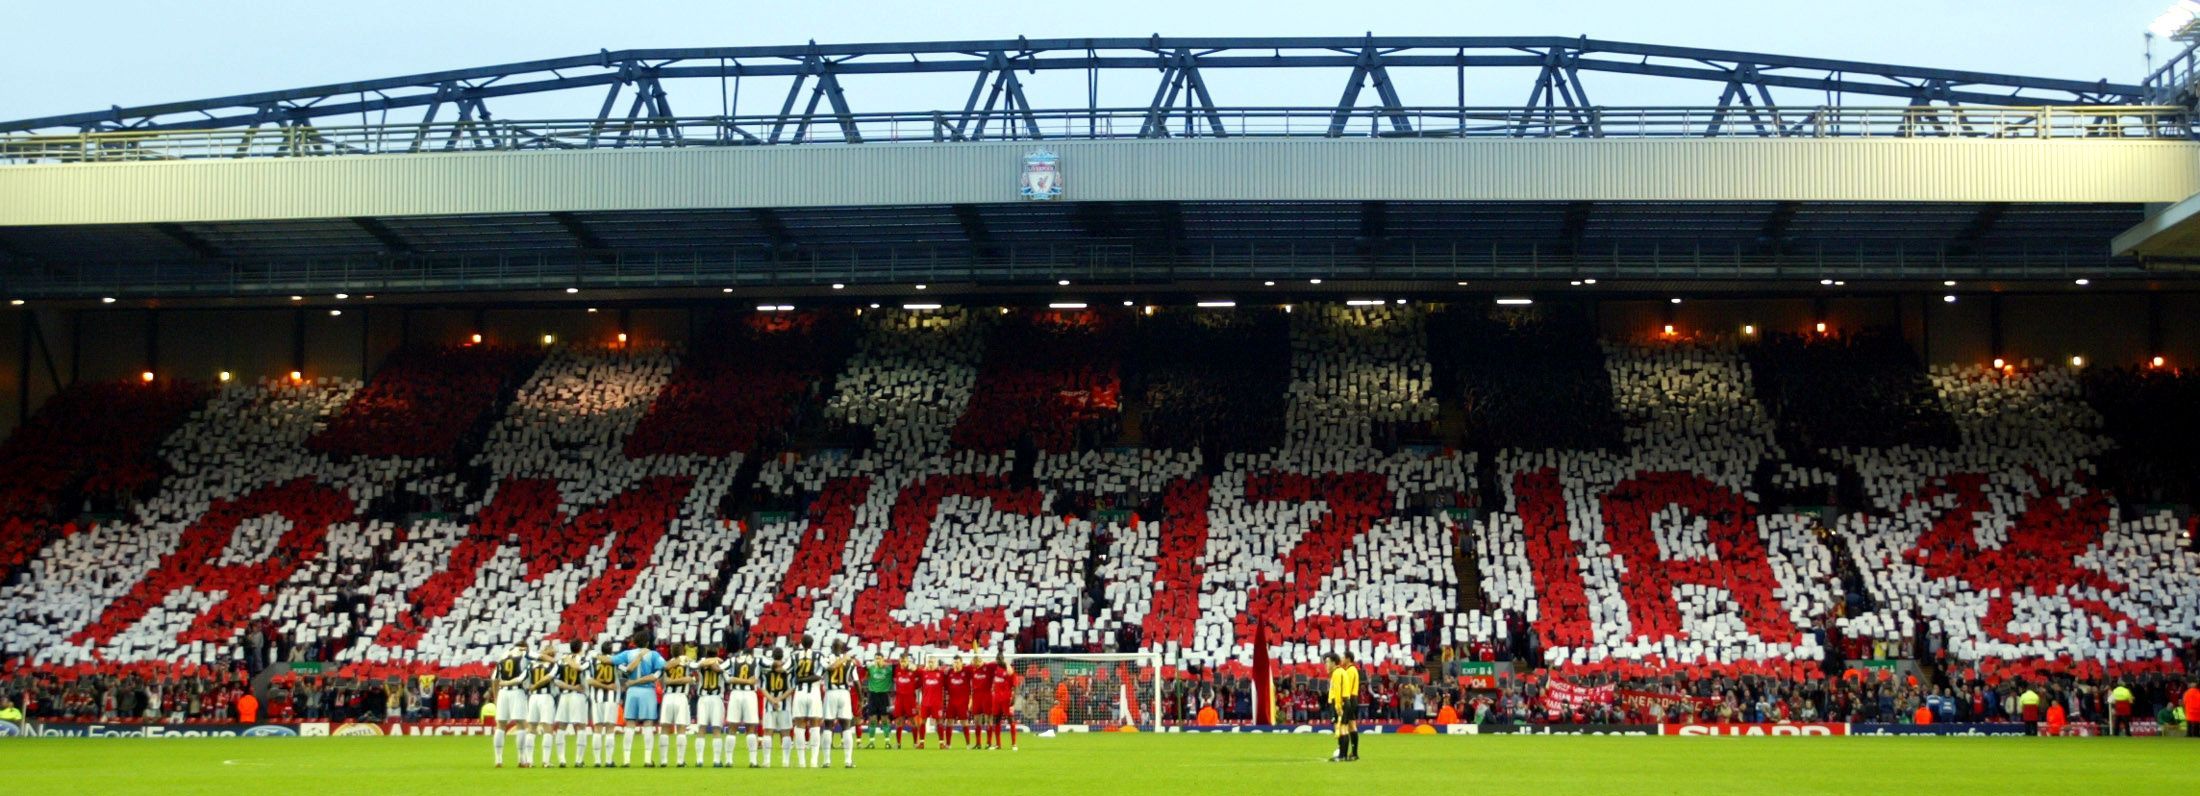 Liverpool supporters hold up a banner paying homage to the 39 fans killed during the Heysel Stadium disaster in 1985 ahead of the first-leg of their Champions League quarter-final against Juventus.